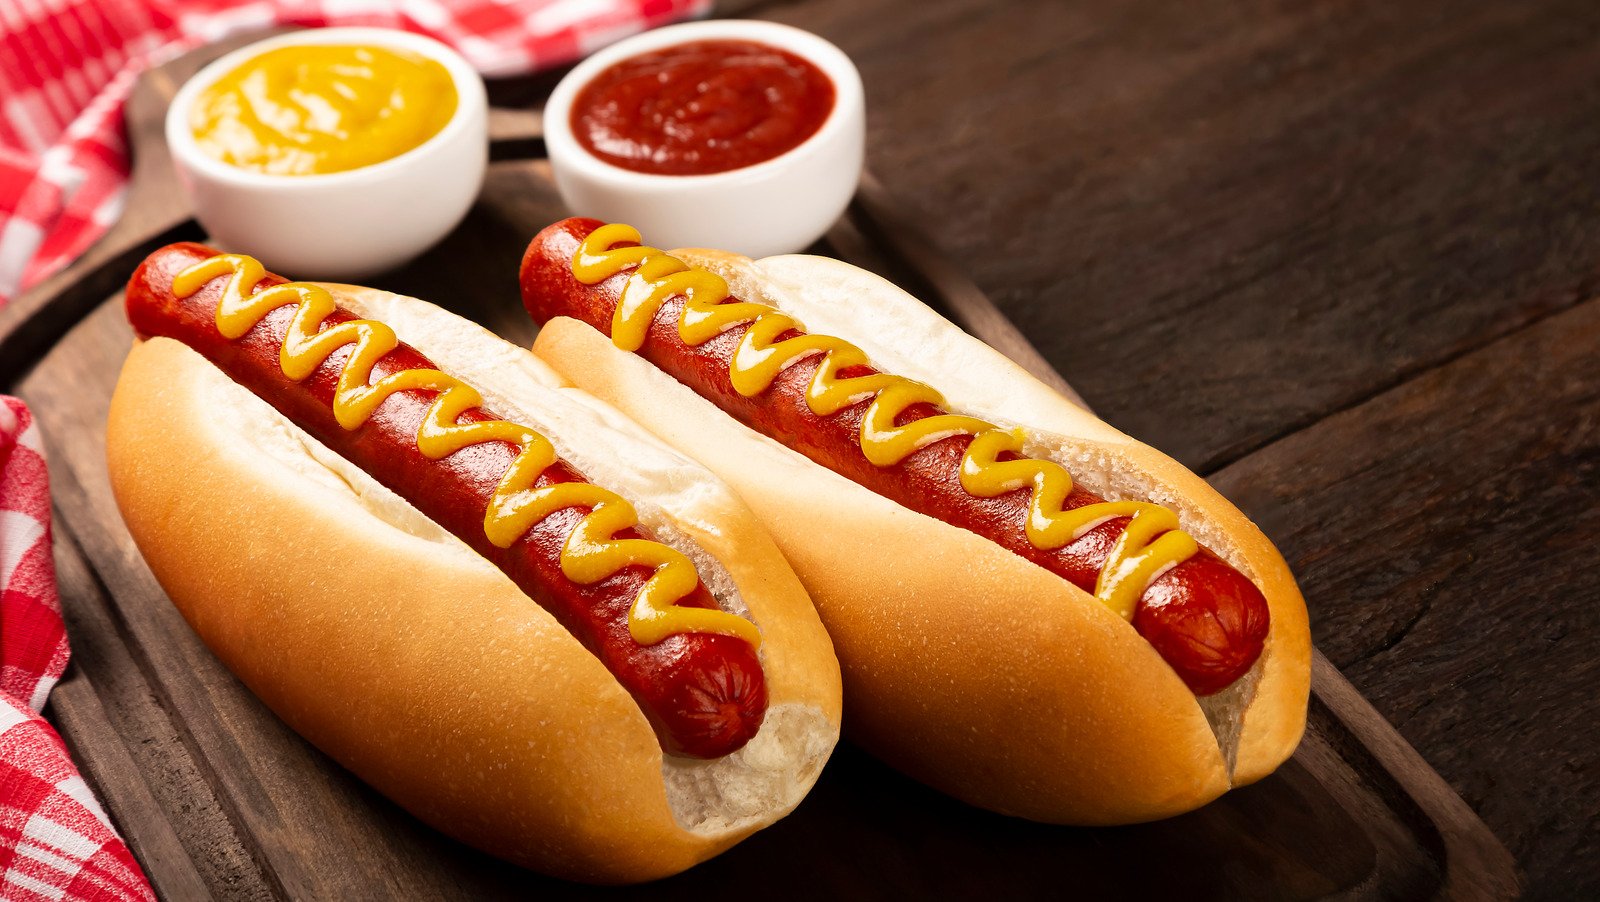 Ranking 12 Fast Food Hot Dogs From Worst To Best - cover